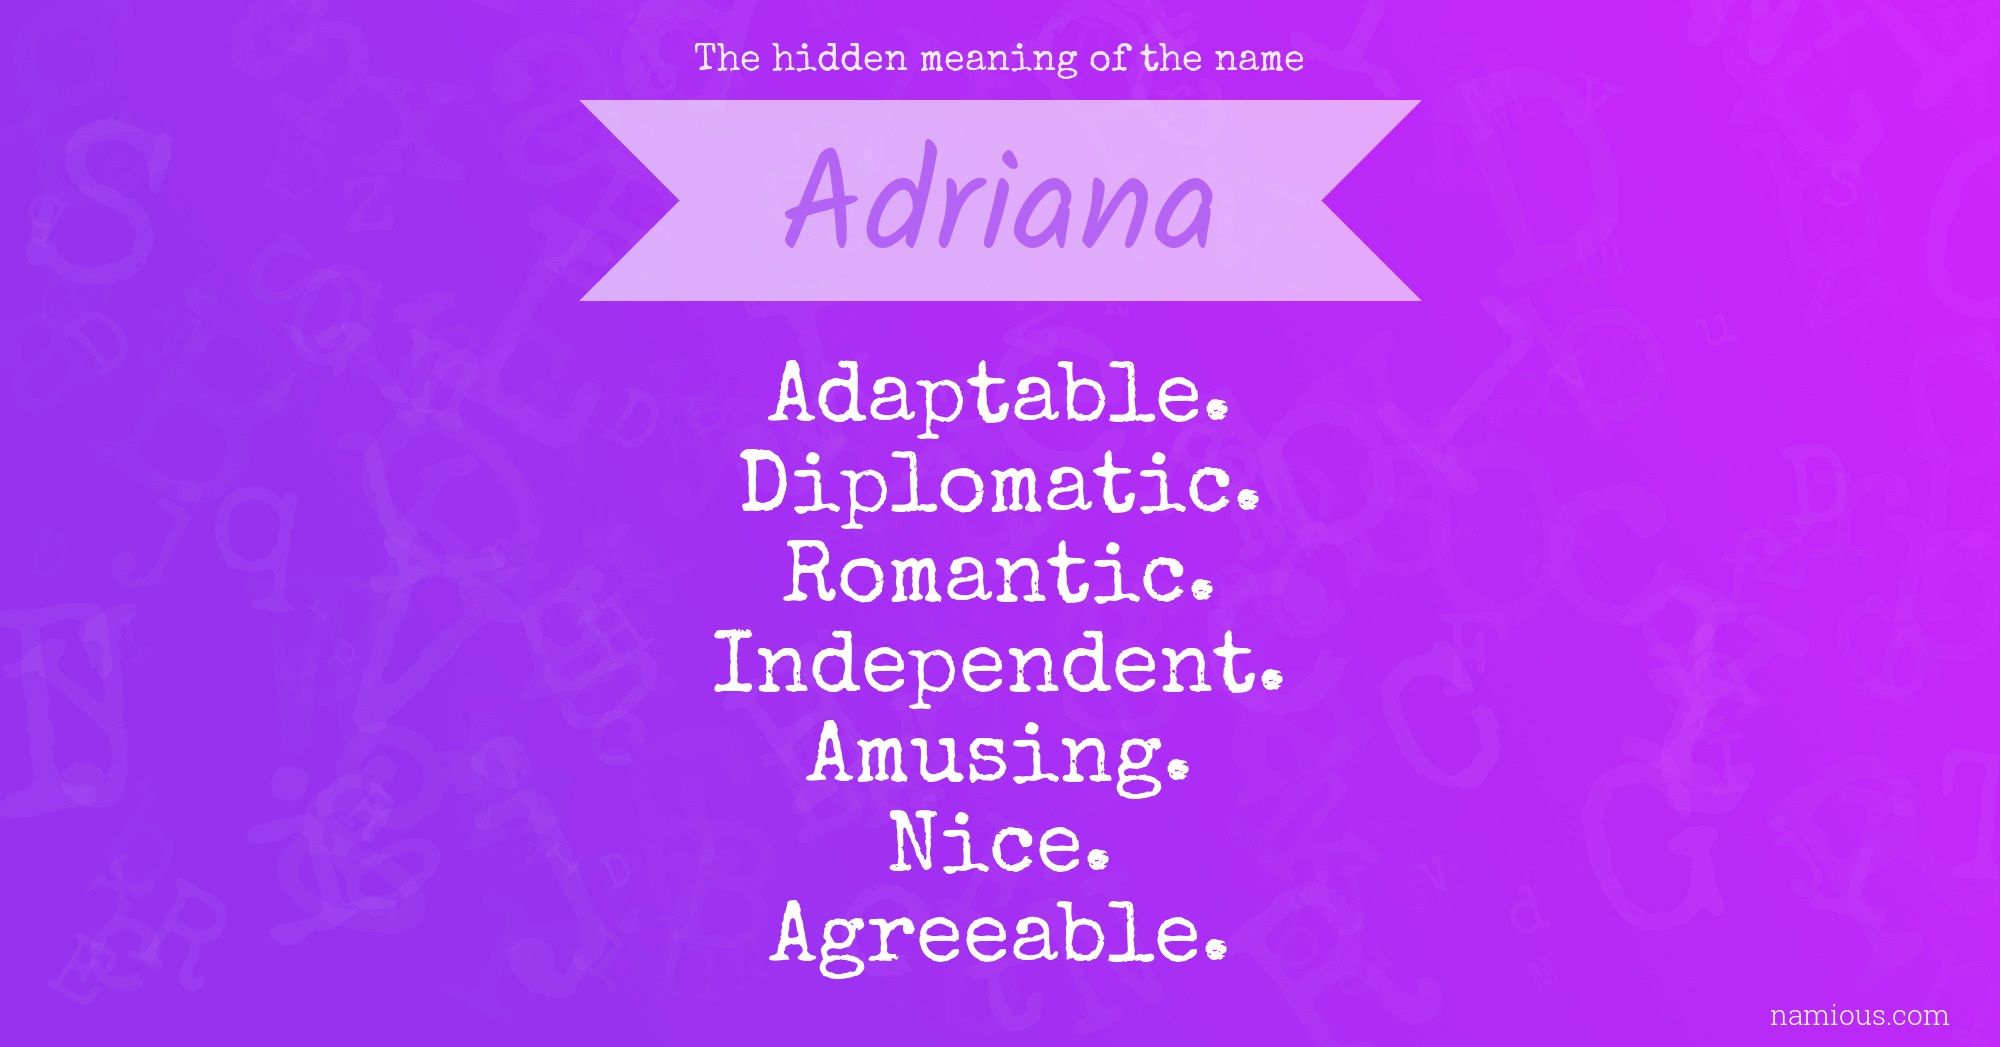 The hidden meaning of the name Adriana